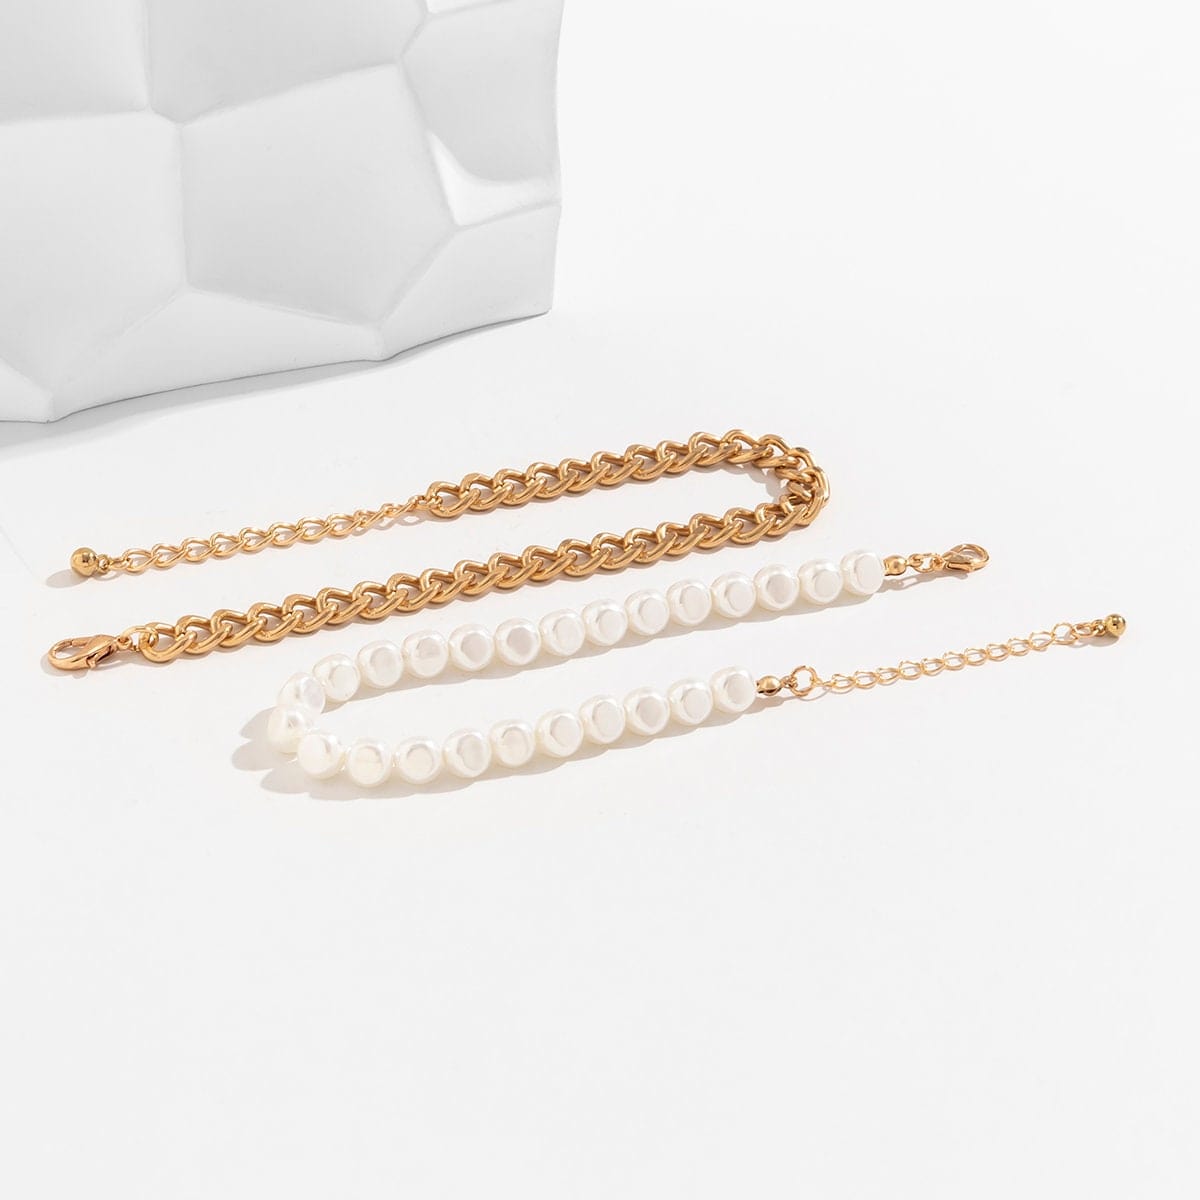 Bohemia 2 Pieces Pearl Curb Chain Anklet Set